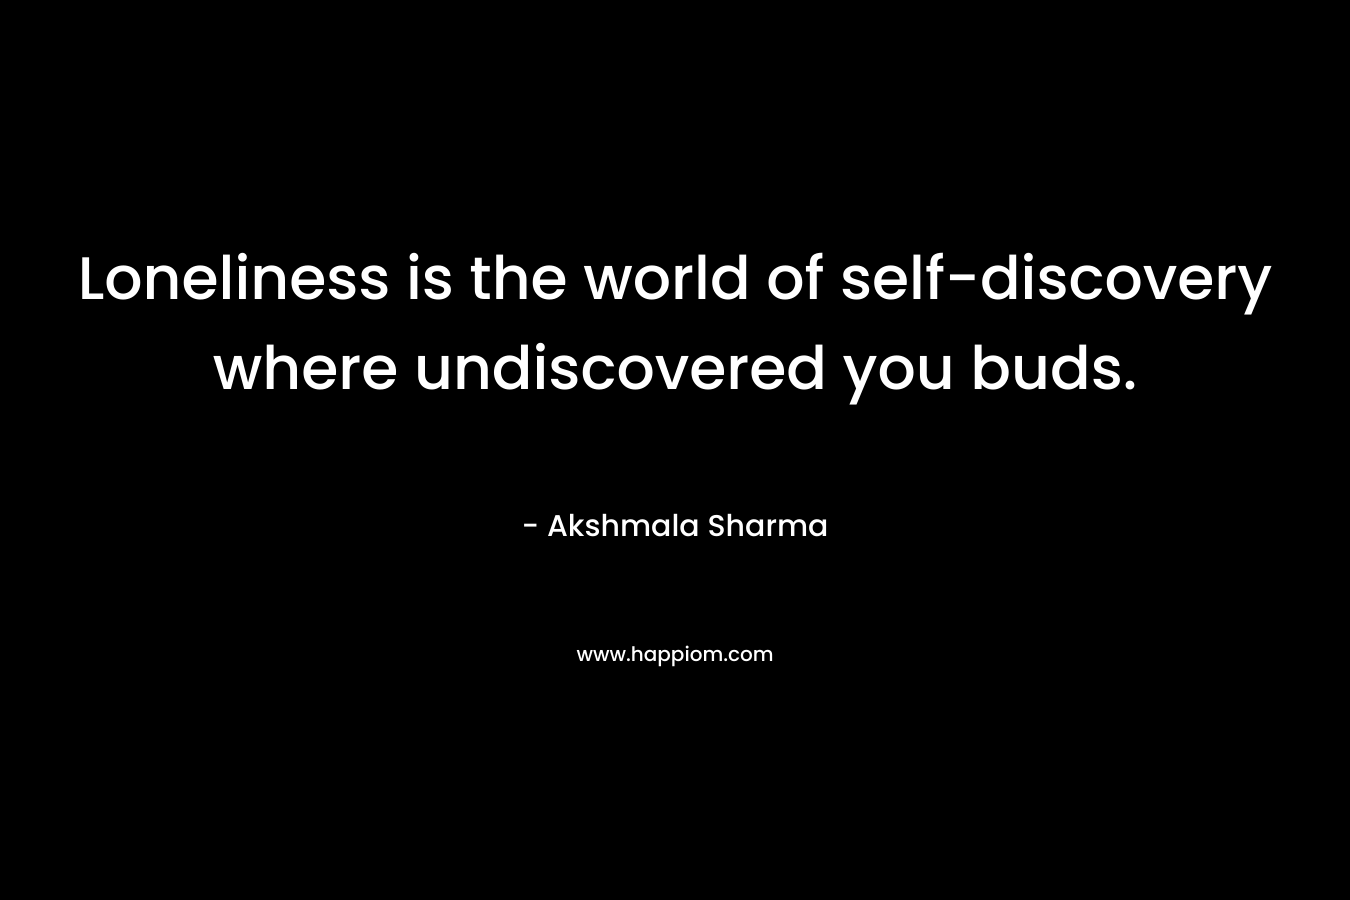 Loneliness is the world of self-discovery where undiscovered you buds. – Akshmala Sharma